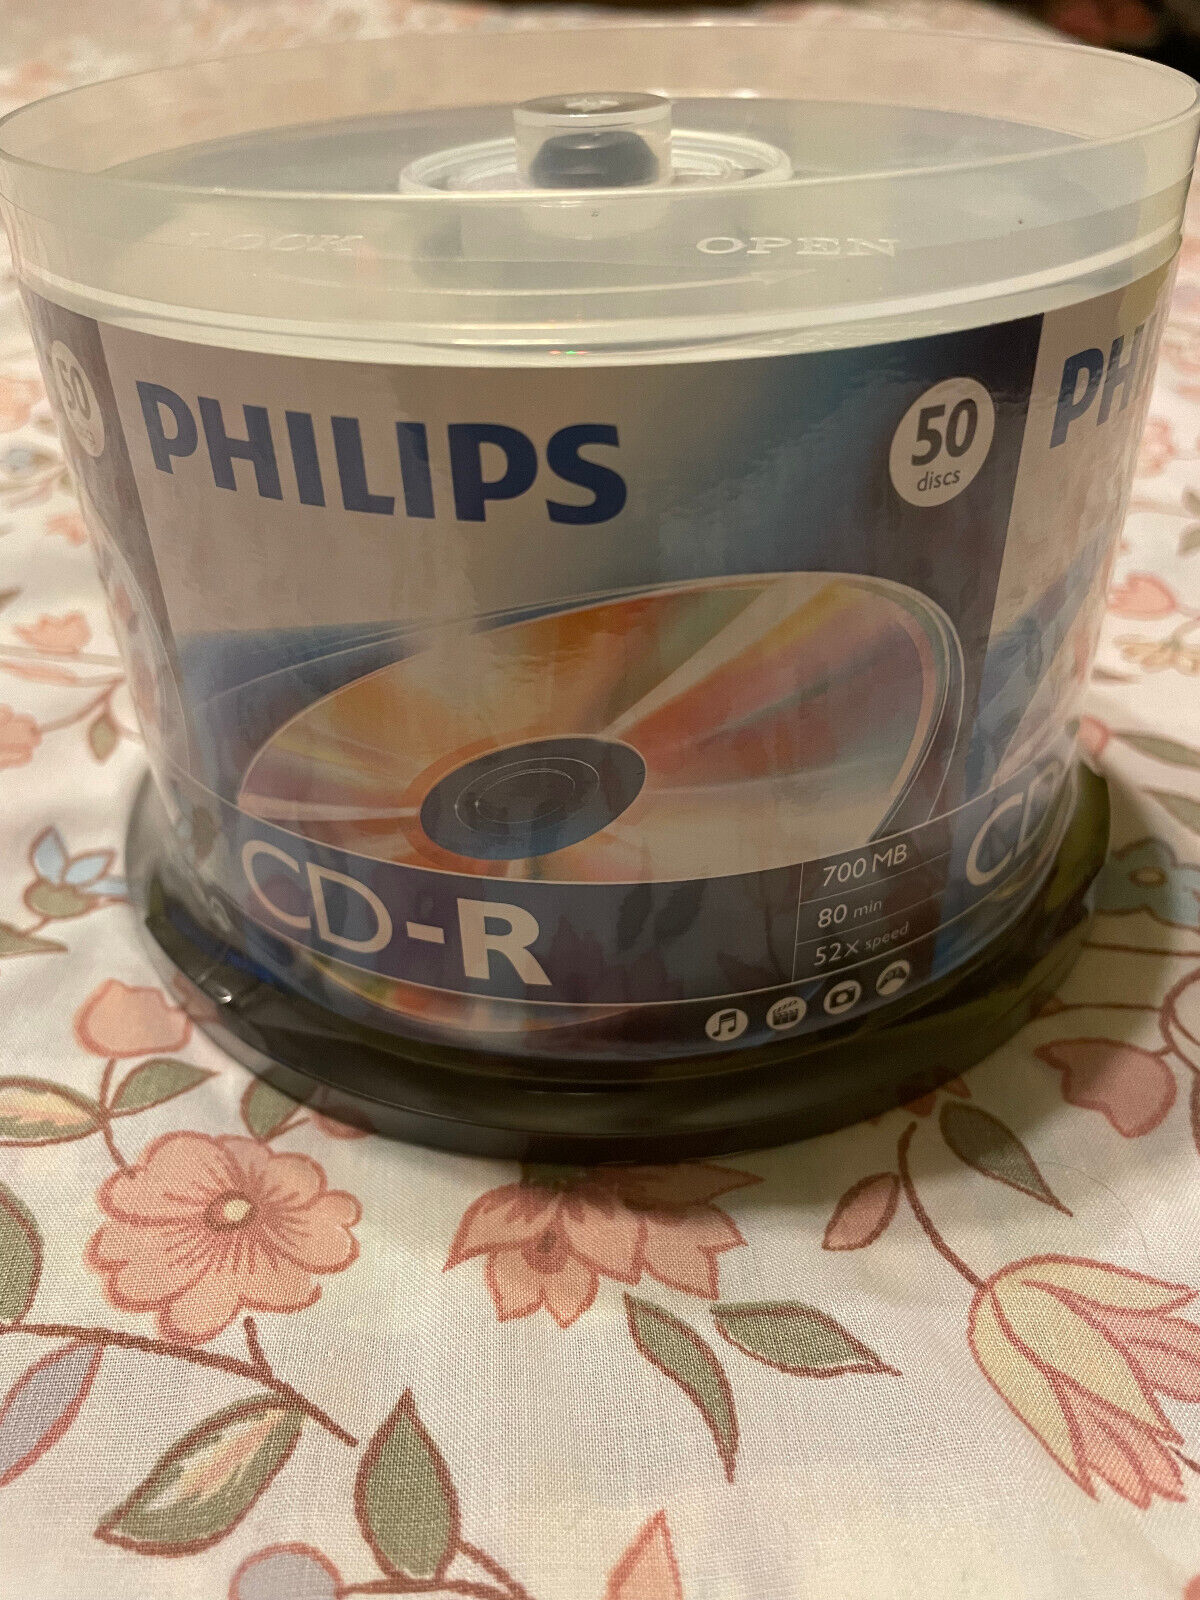 Philips CD-R Pack of 50 Disc Media 700MB 52X Speed 80min